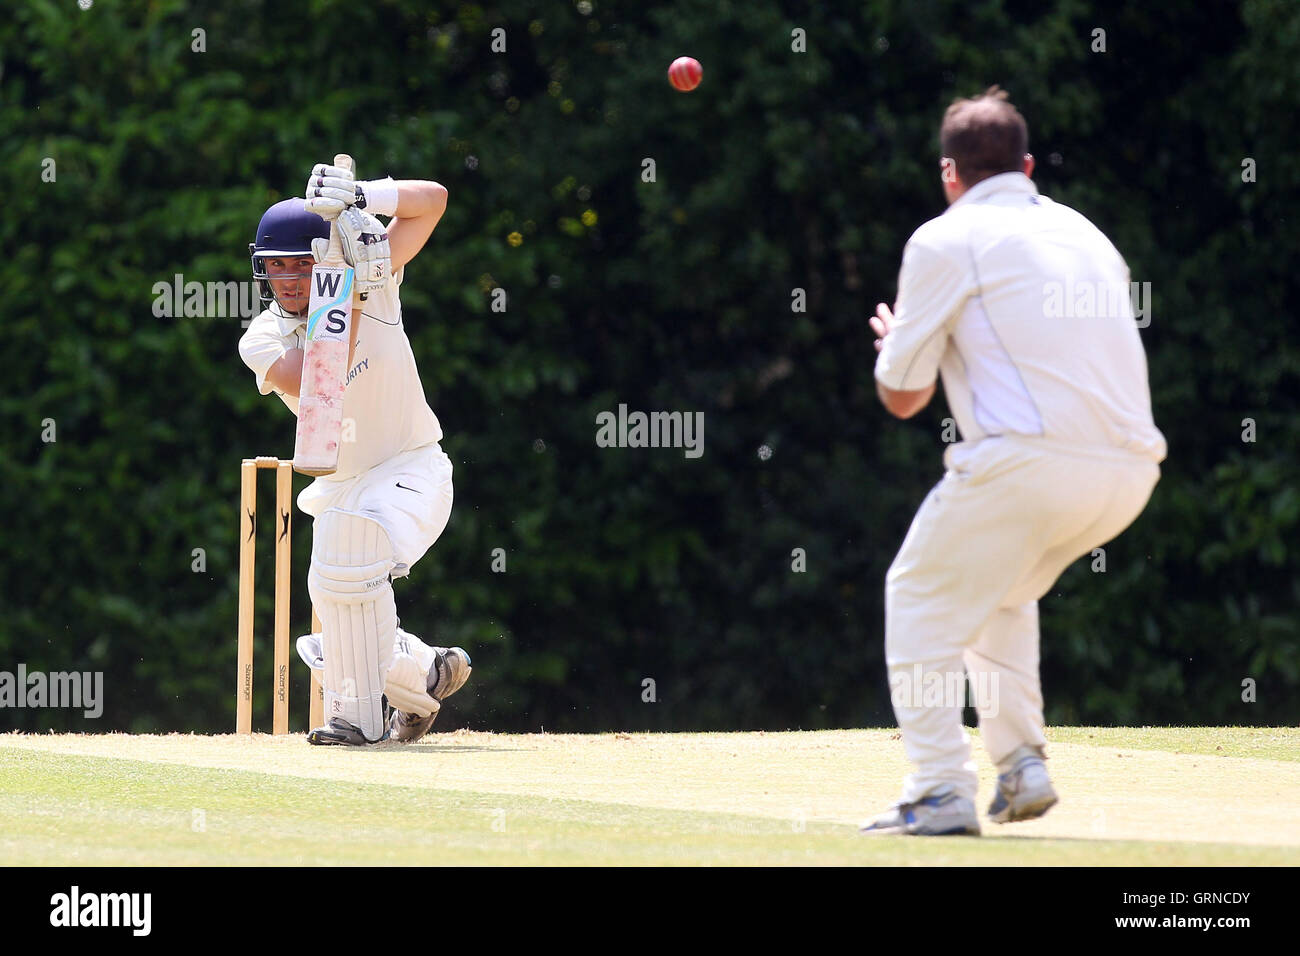 Tom Phillipe in batting action for Shenfield - Shenfield CC vs Upminster CC - Essex Cricket League - 21/06/14 Stock Photo